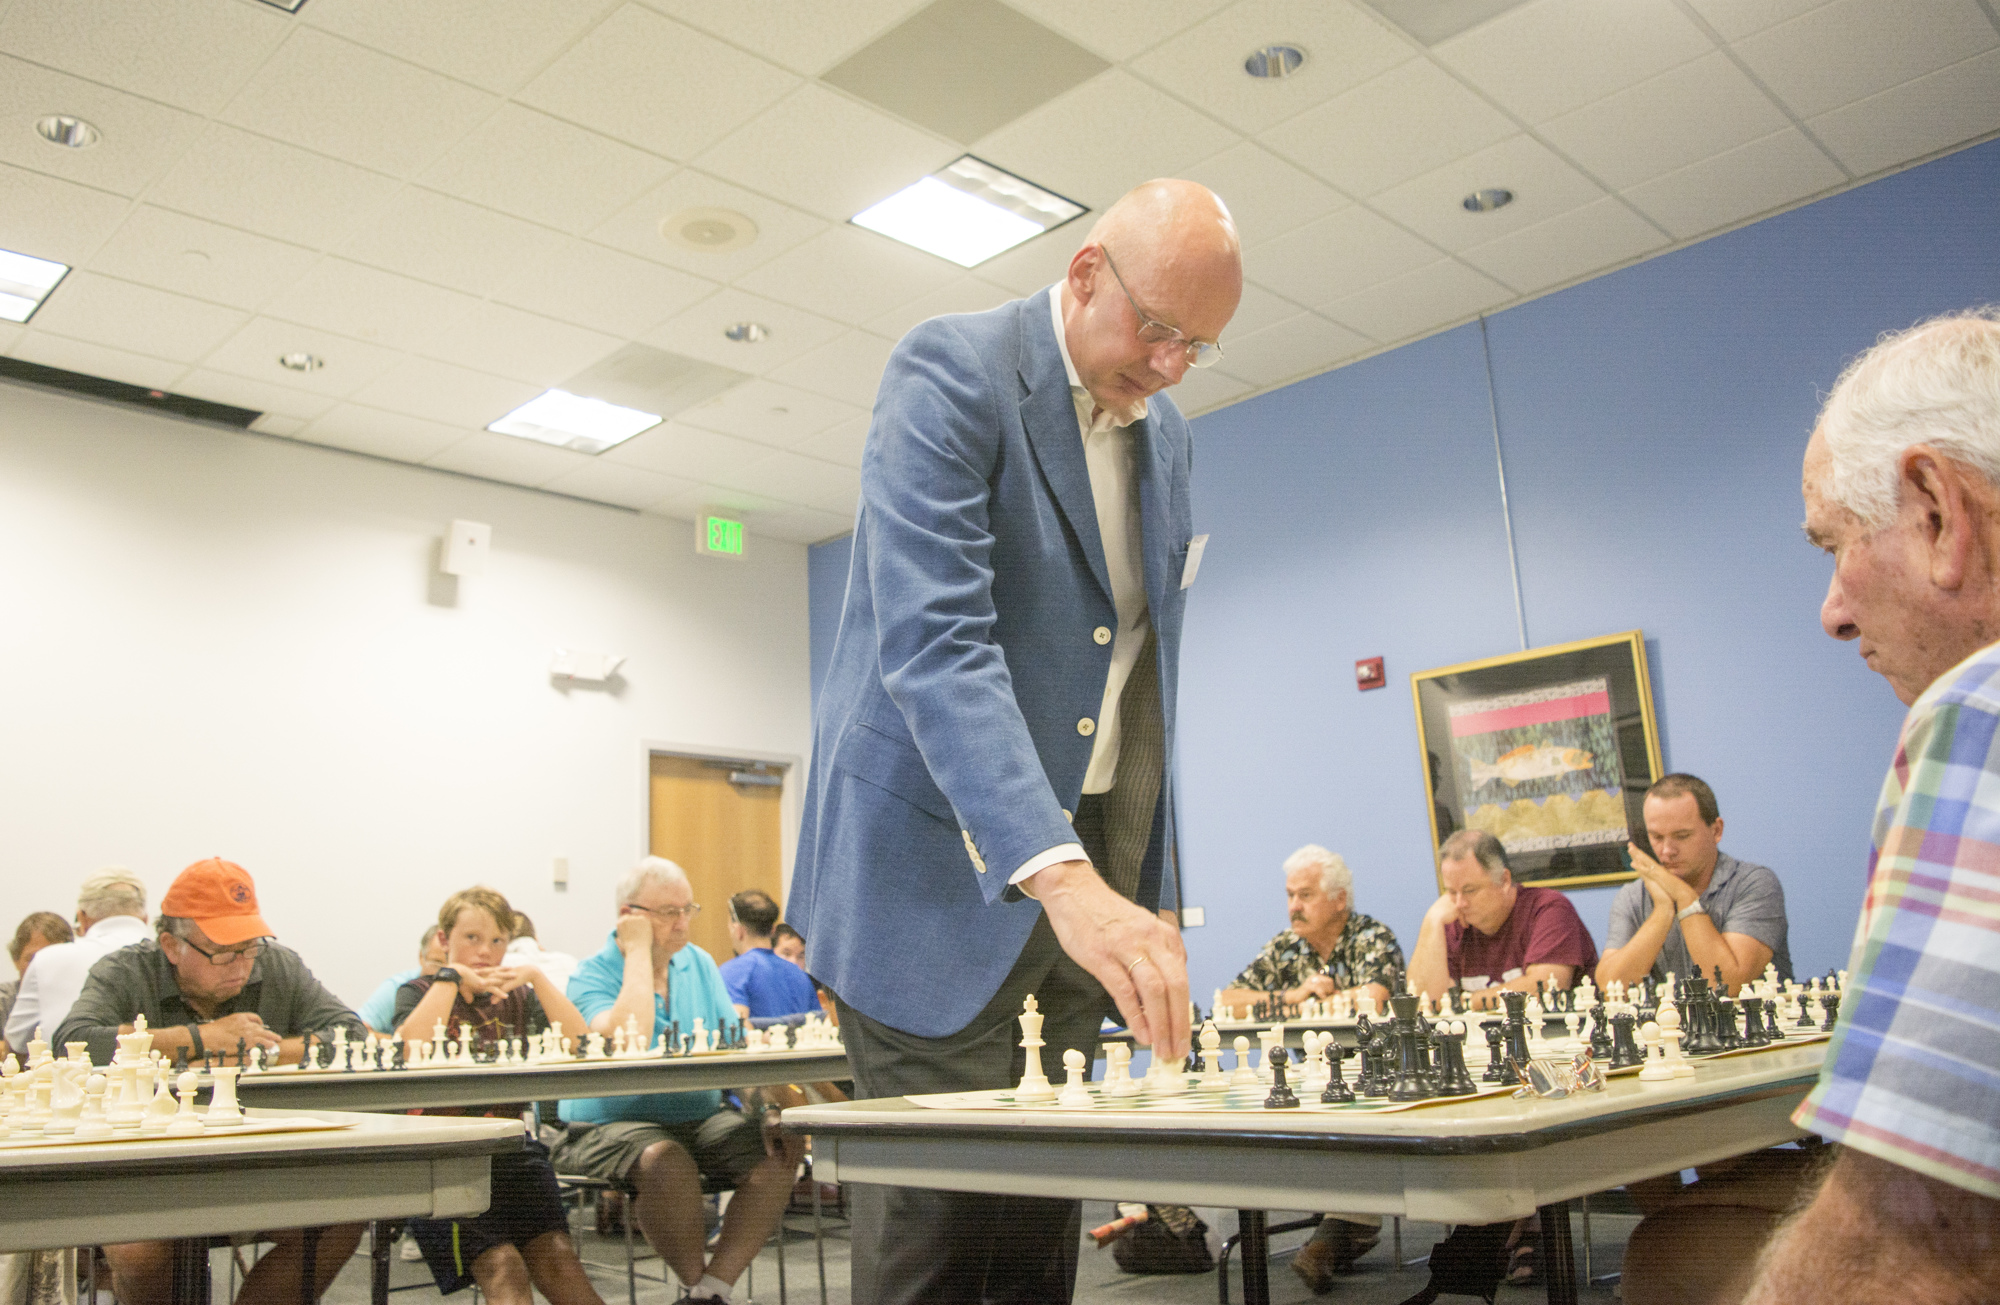 Hans Schut participates in a simultaneous match with 16 opponents.